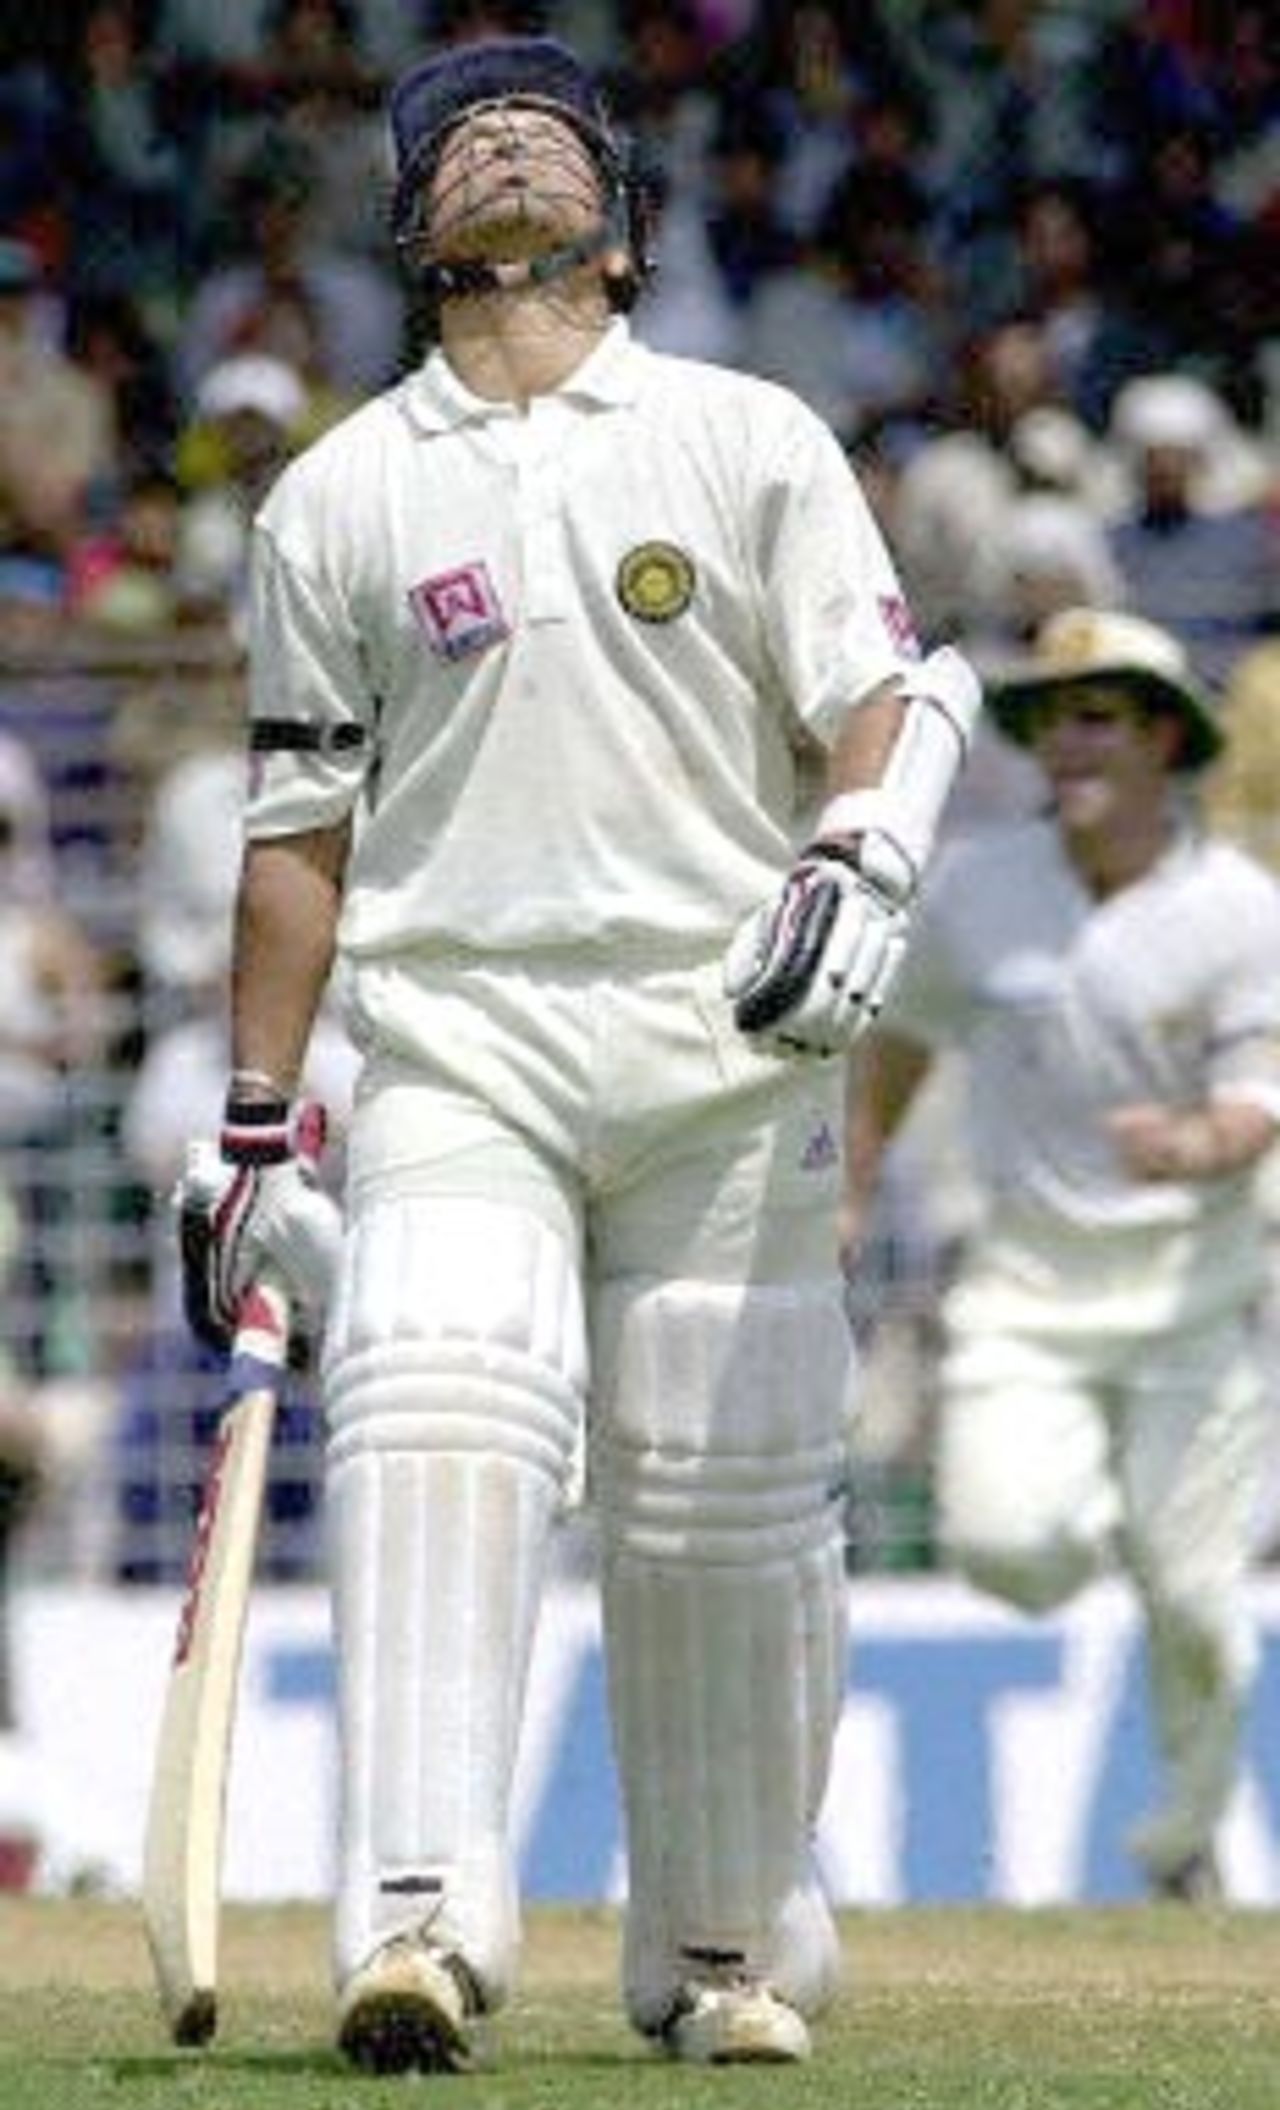 Indian ace batsman Sachin Tendulkar after being caught out for 65 runs off the bowling of Australian Mark Waugh on the third day of the first test match between India and Australia at the Wankhade stadium in Mumbai 01 March 2001. With the quick loss of Sachin Tendulkar and Indian captain Sourav Ganguly's wicket after lunch, India were in trouble at 56 for 4 after conceding a 173 runs lead to Australia in the first innings.